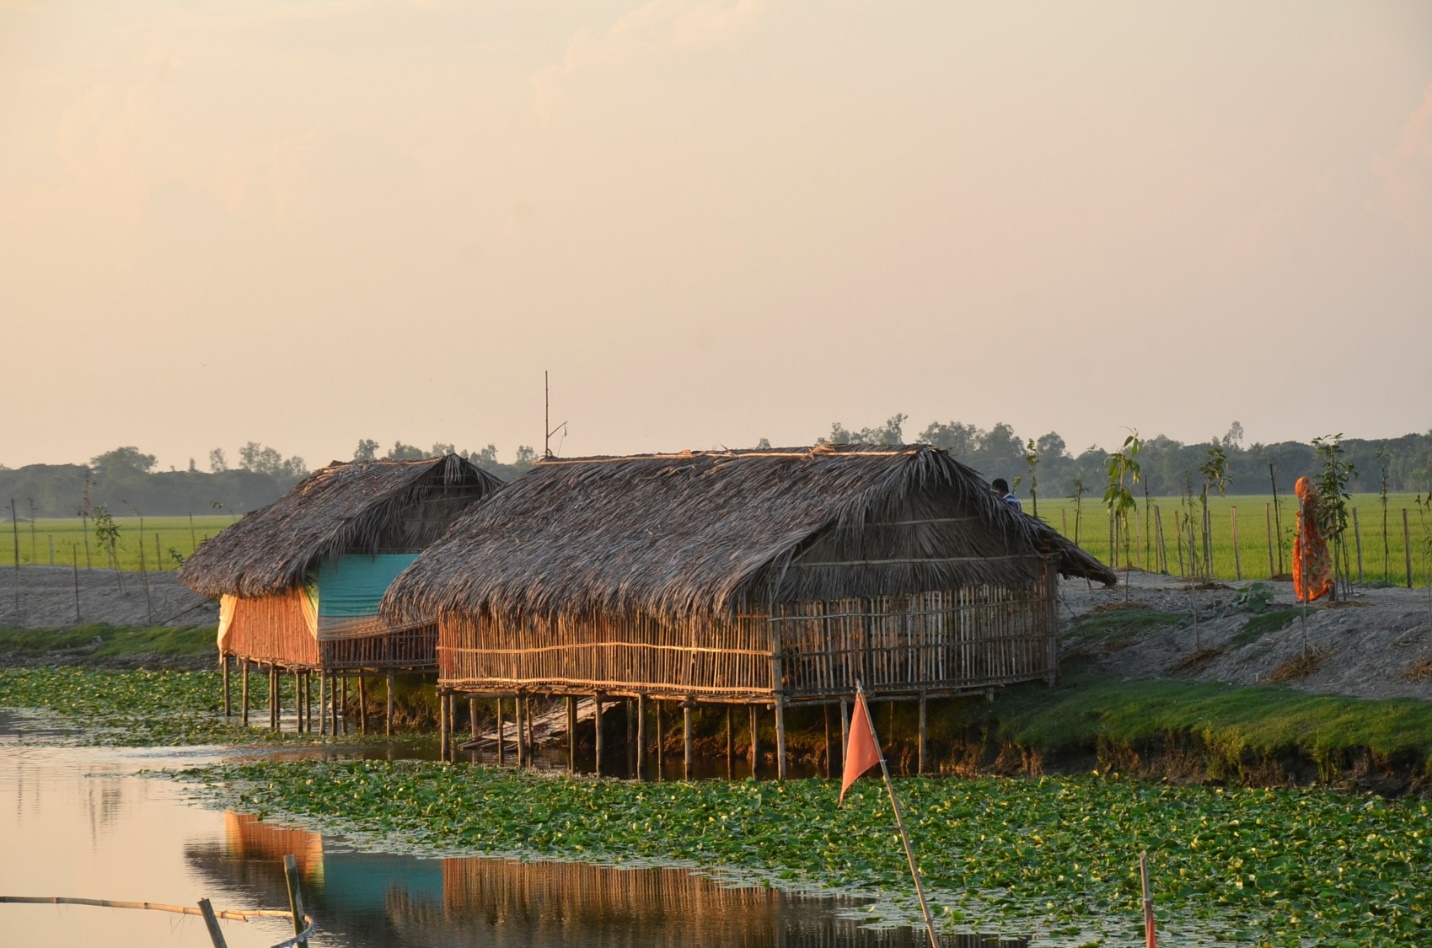 Two bamboo structures on stilts above a full river with green growth along the banks and sides